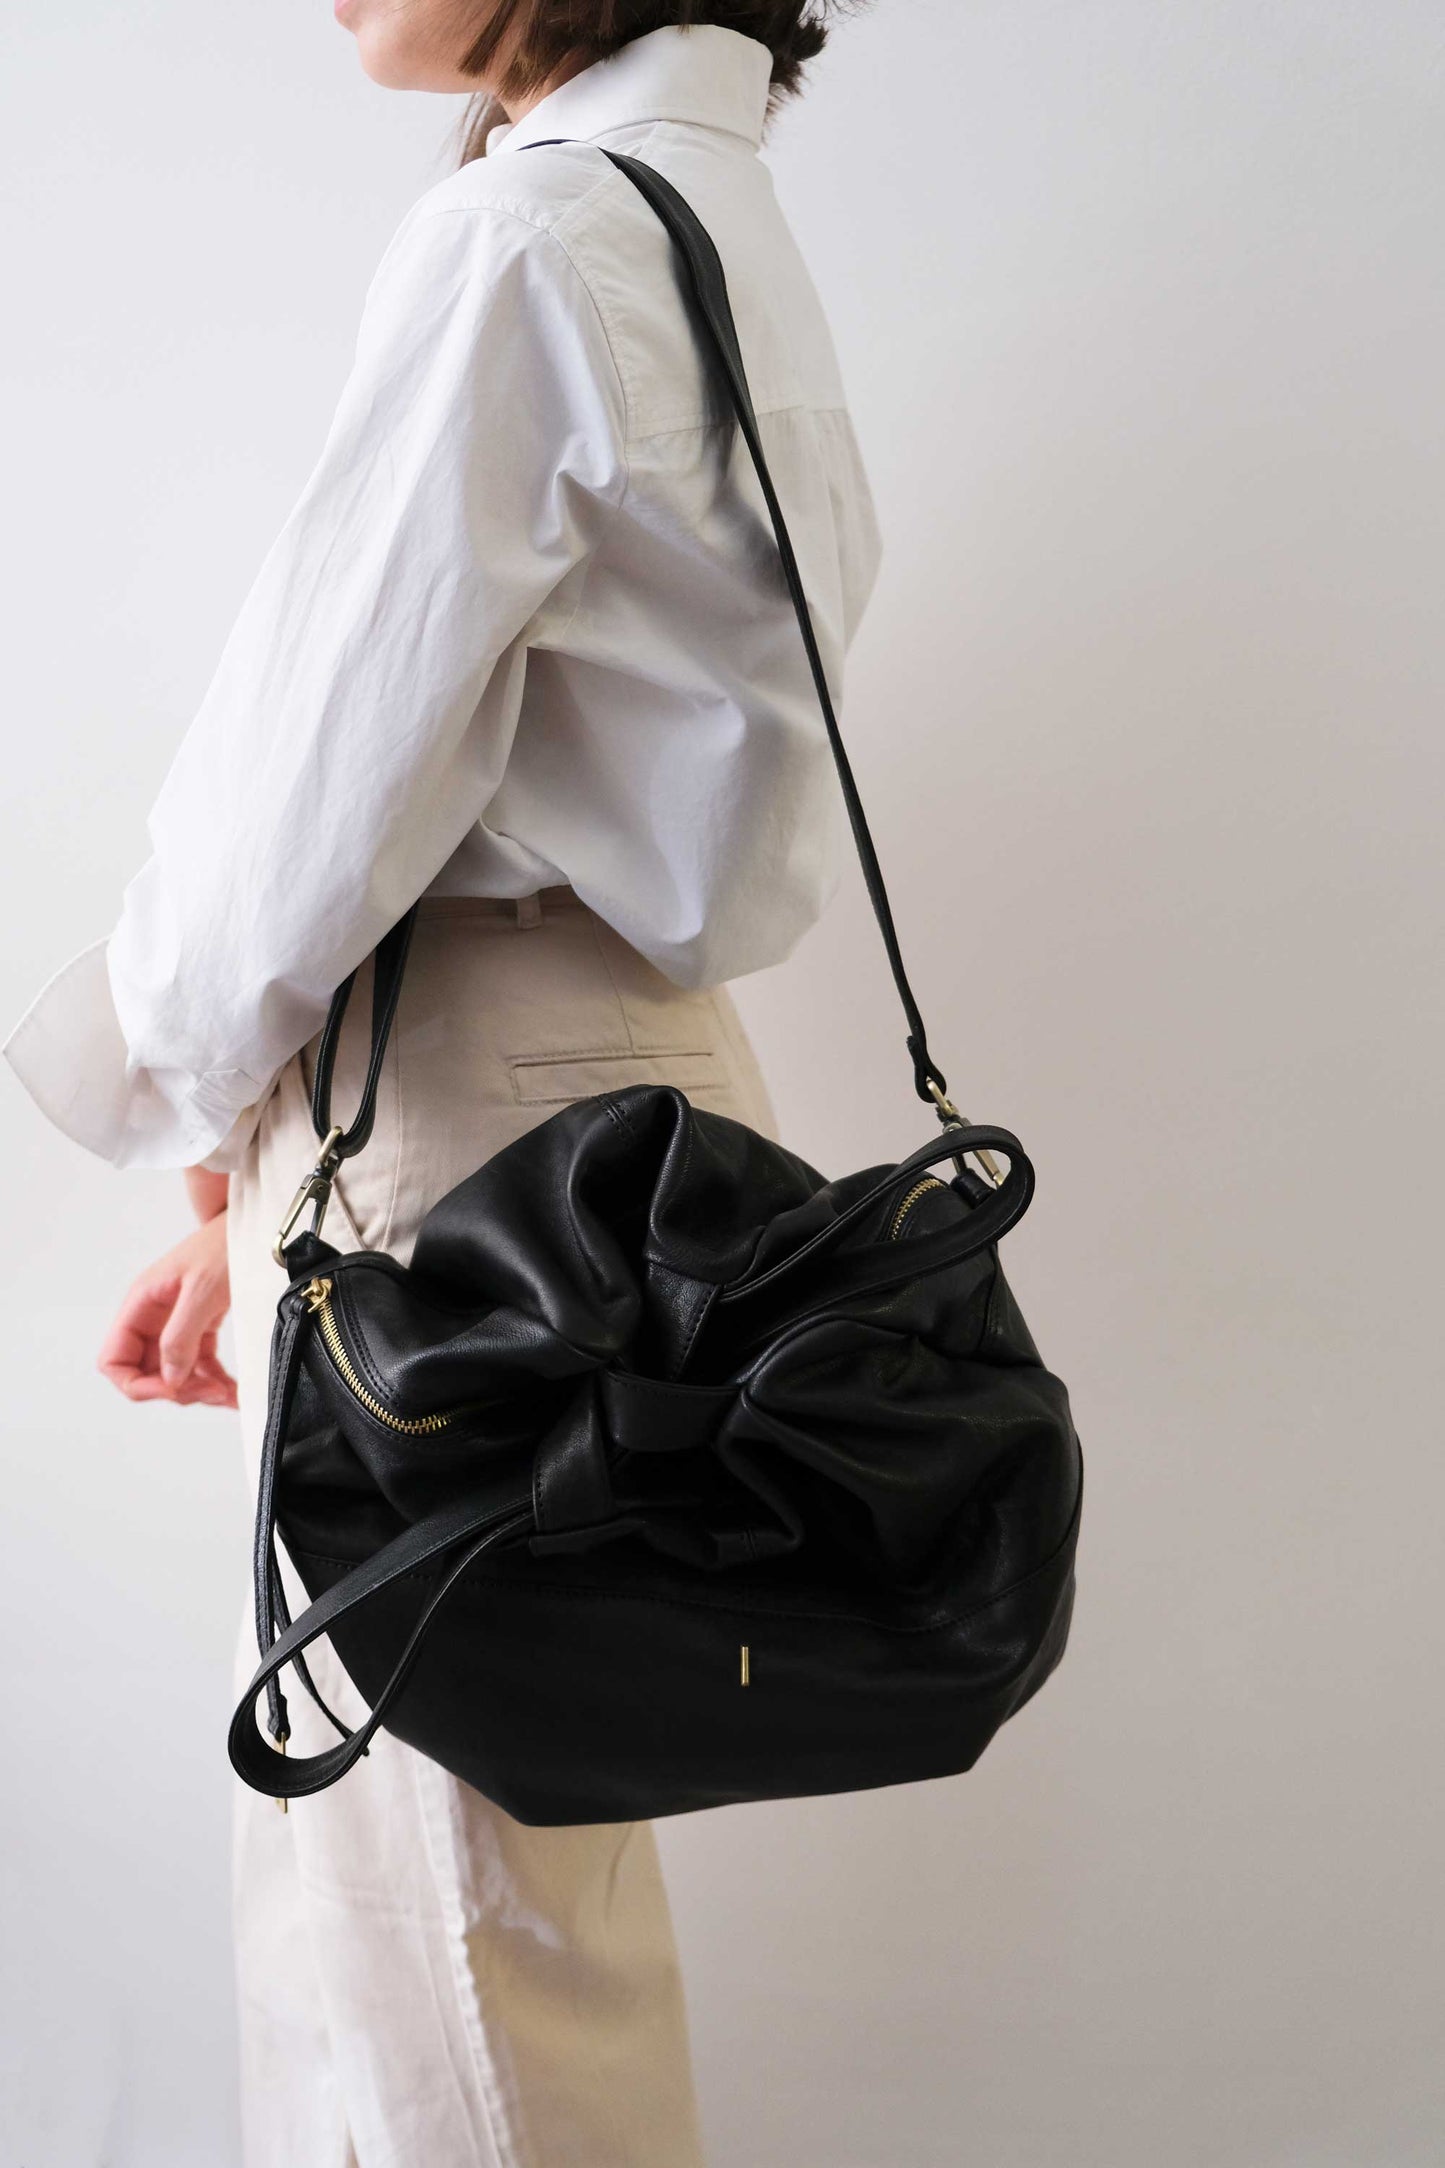 PRE ORDER - discount 15% -Riri tote bag in black nappa leather- use code PREORDER15- DELIVERY END OF MAY